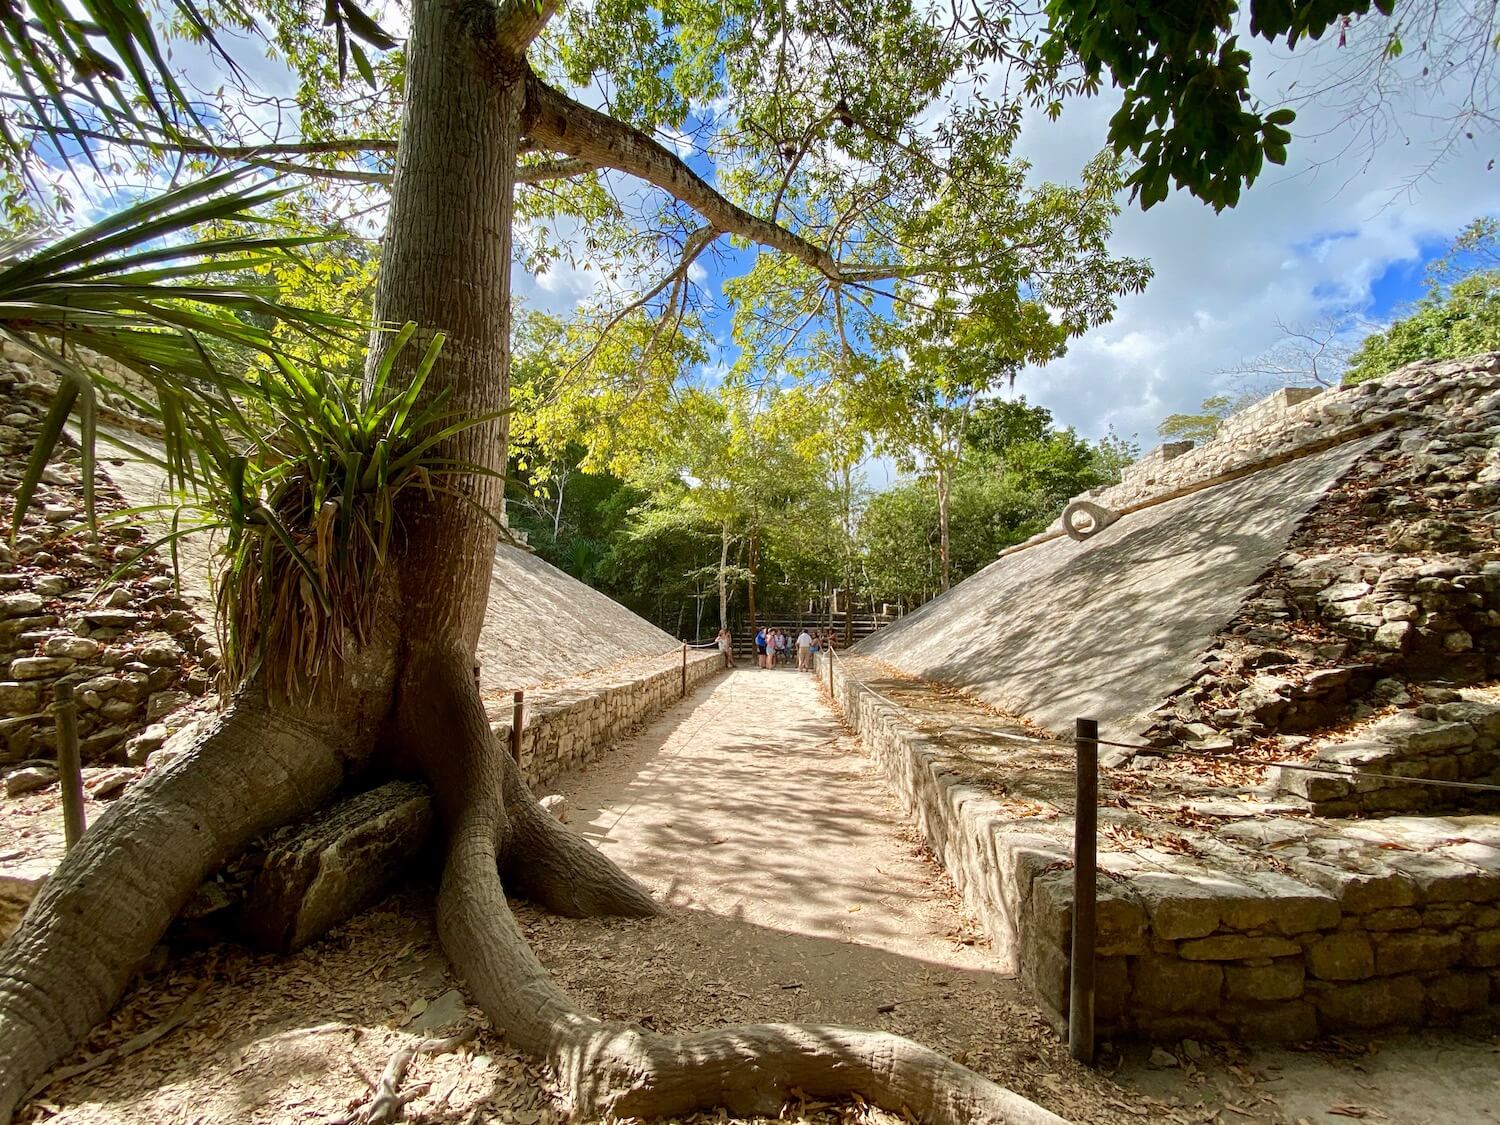 A giant jungle tree grows along the side of the ancient ball court in the Coba Group of Mayan ruins in the ancient development.  The ball court is composed of two bleacher like diagonal stone walls with hoops towards the top of these walls which were used for athletes to throw rubber balls through.  There are jungle trees in the background and blue sky above. 